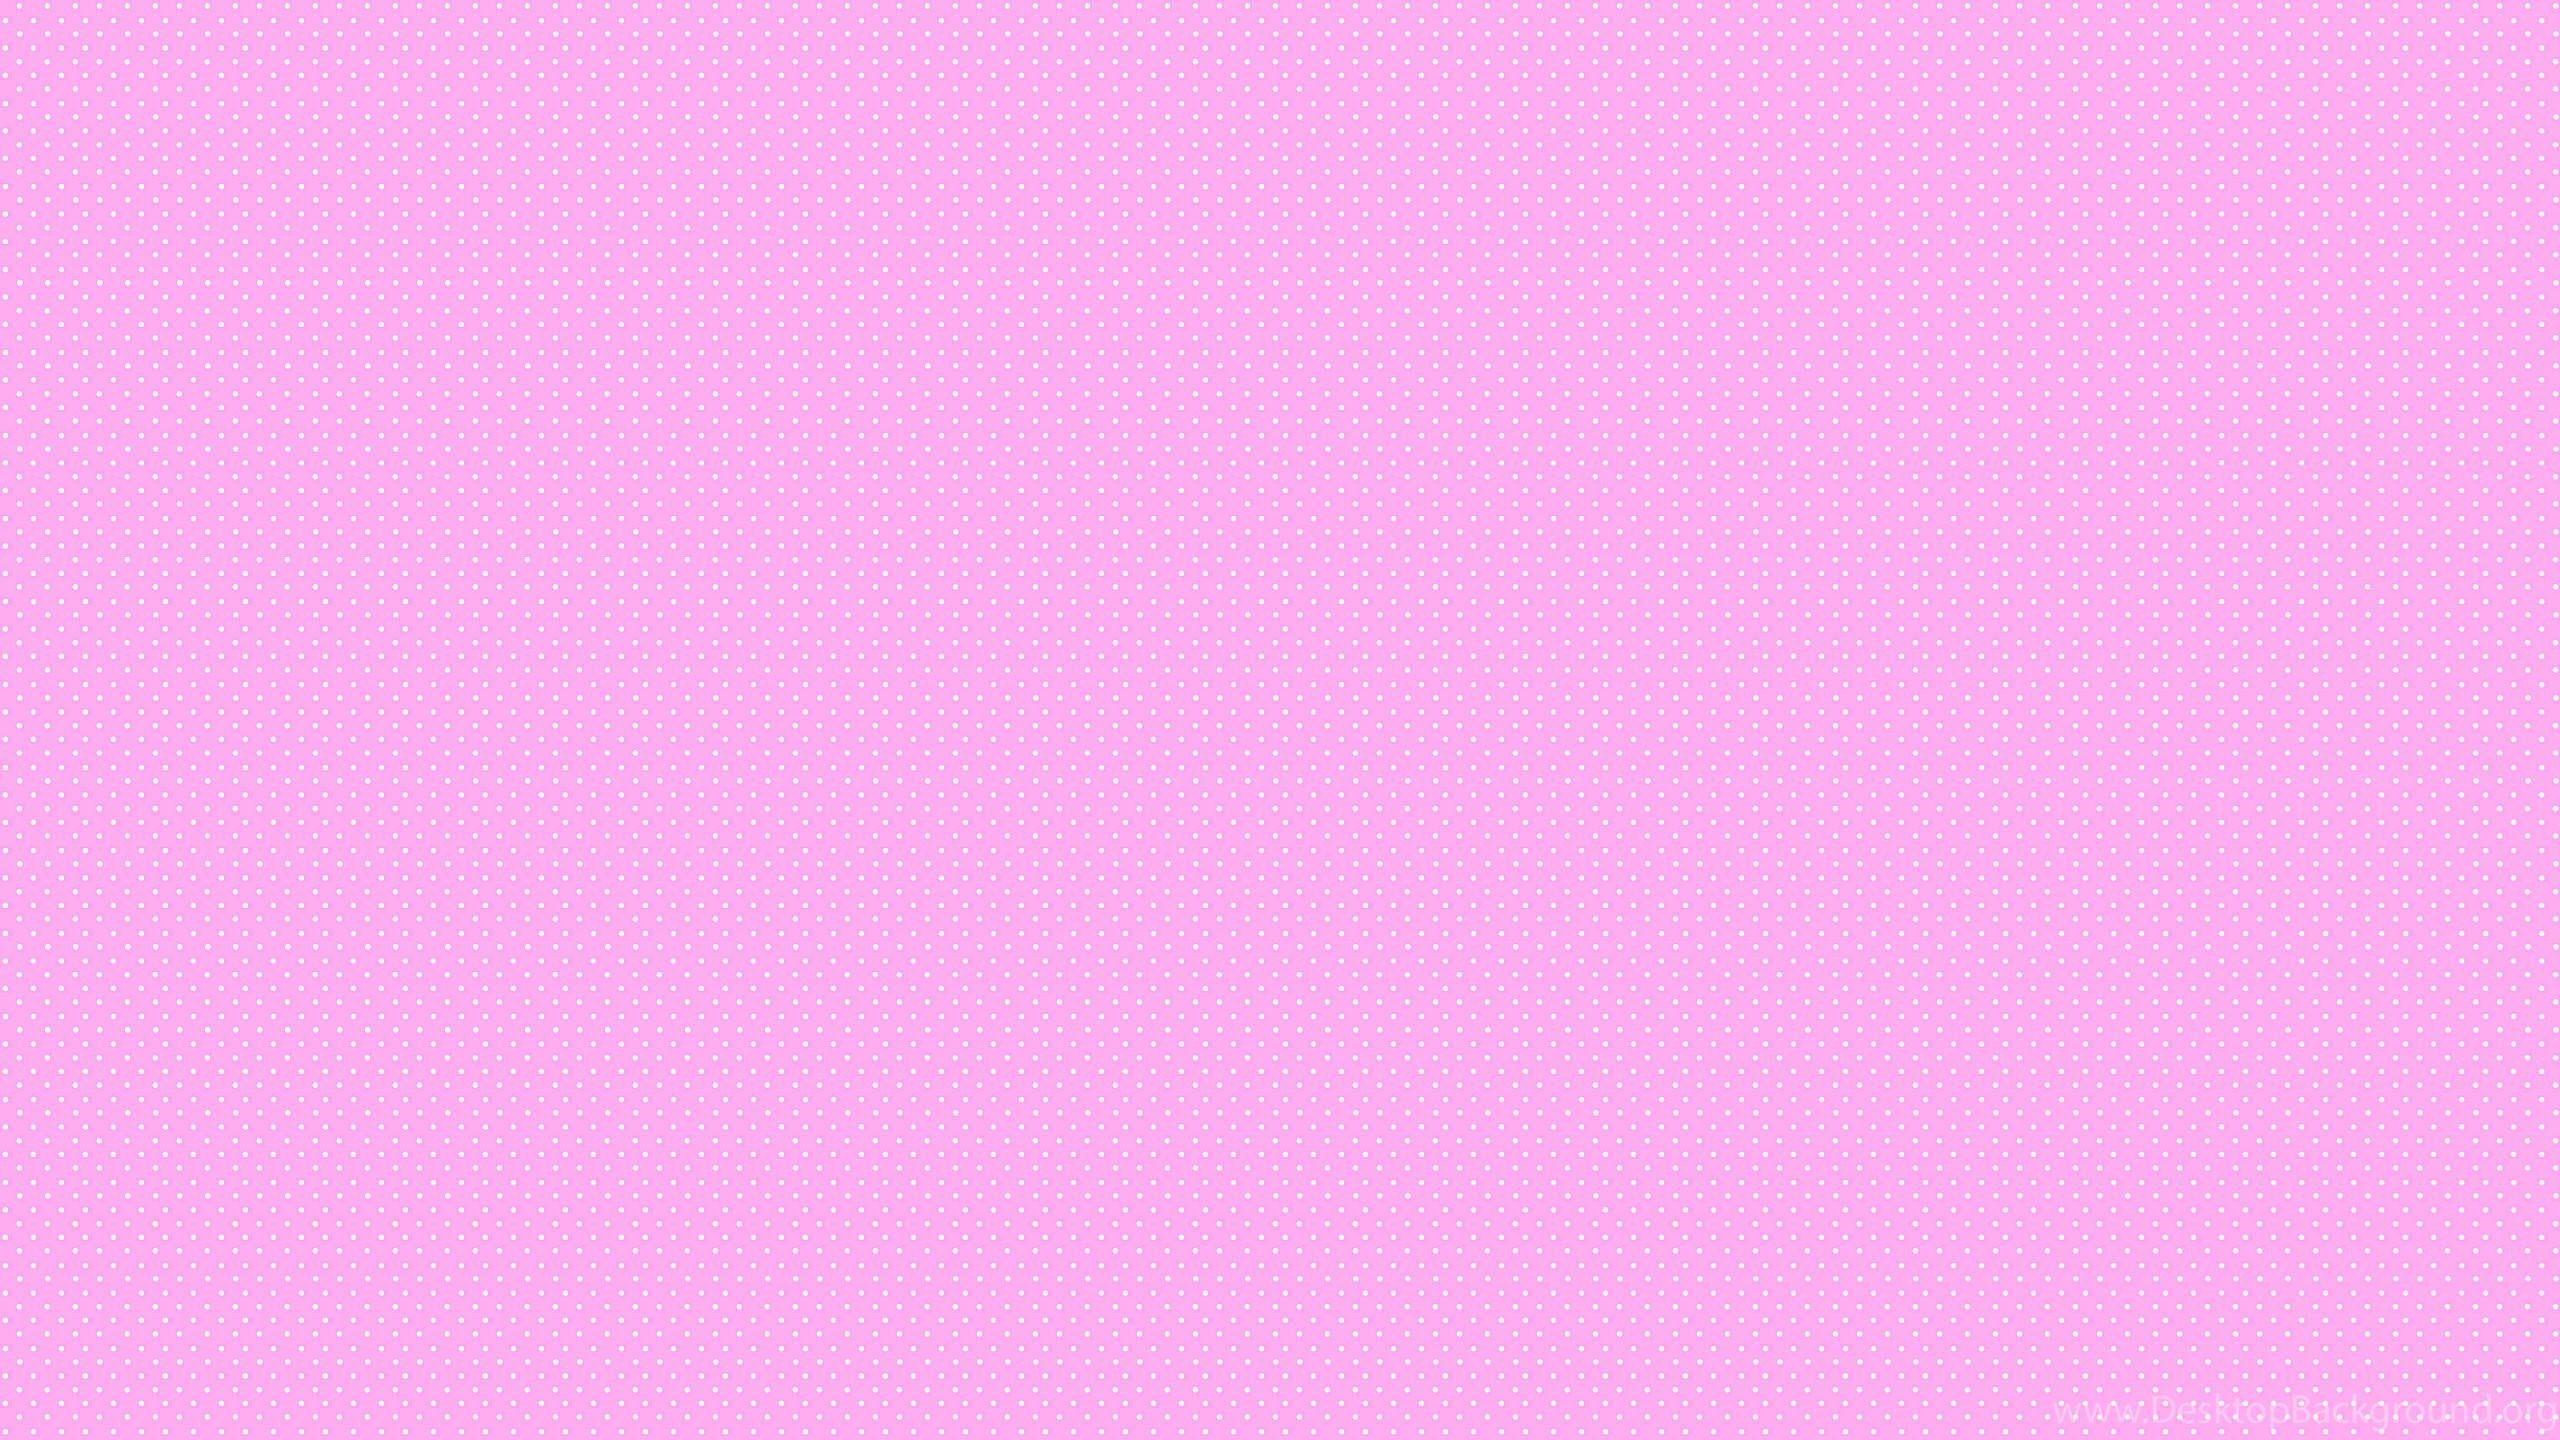 Solid Pink Wallpapers - Wallpaper Cave